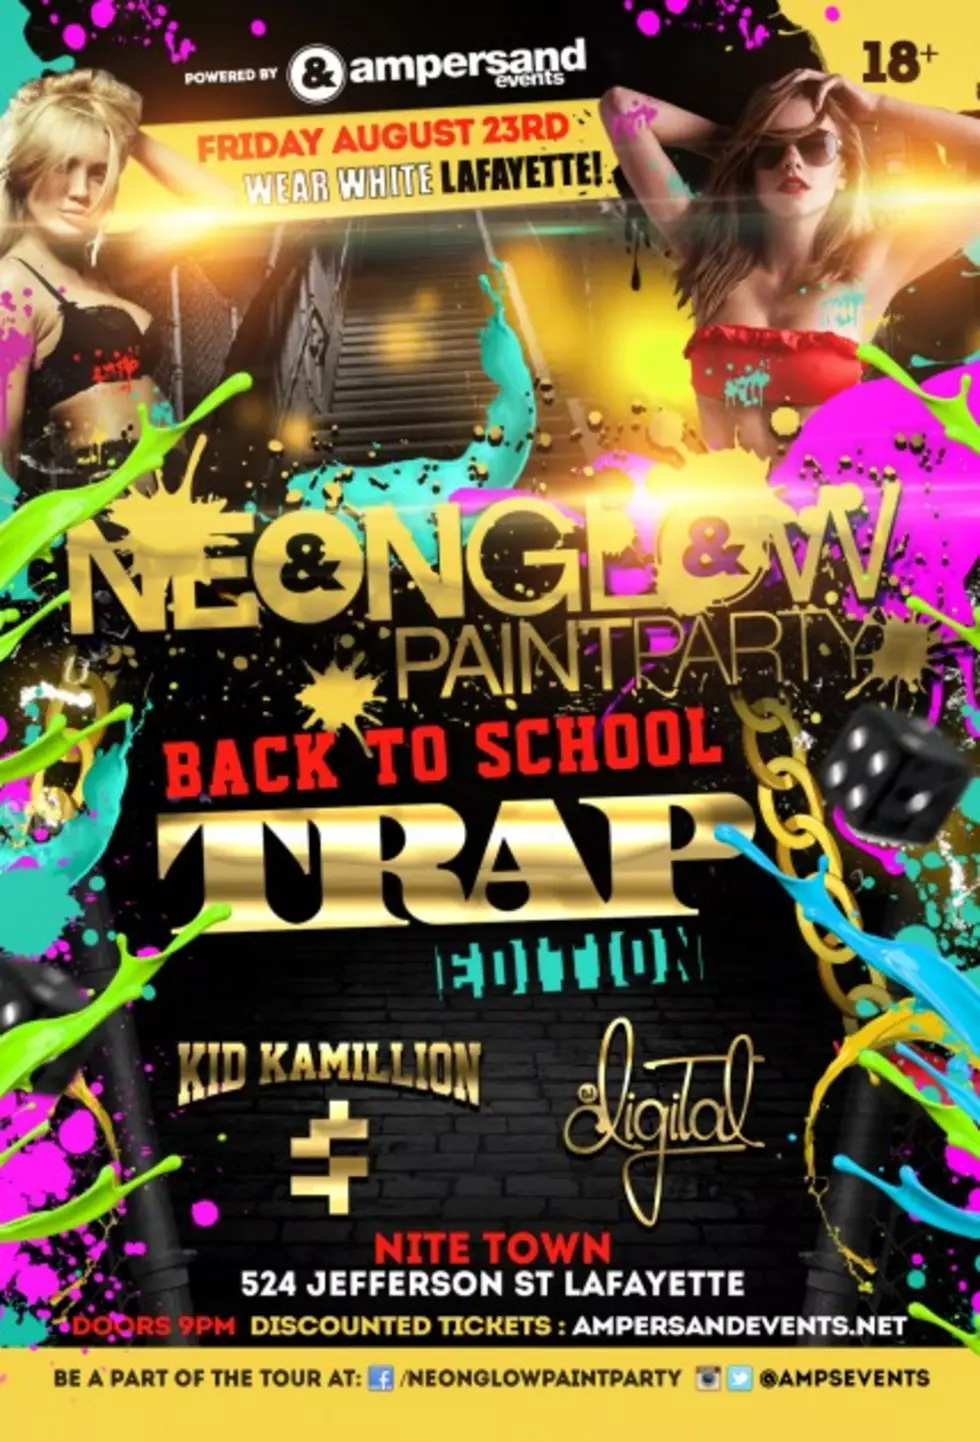 NeonGLOW Paint Party Tour Returns To Lafayette With &#8216;Back To School Trap Edition&#8217; At Nite Town